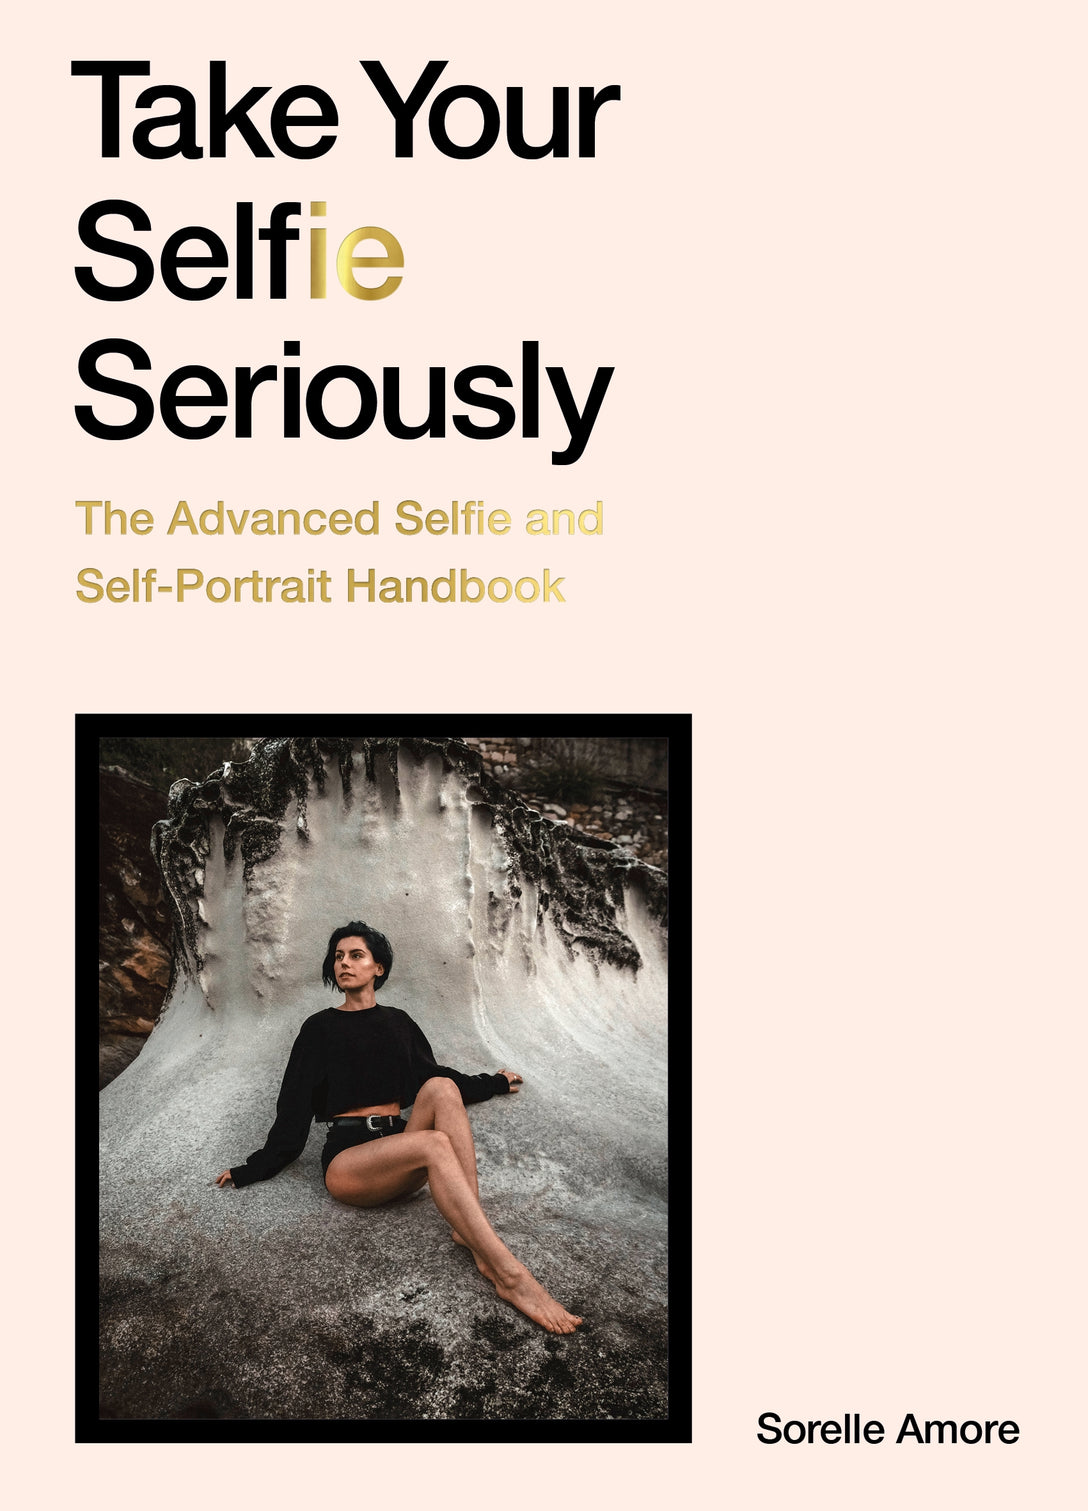 Take Your Selfie Seriously by Sorelle Amore